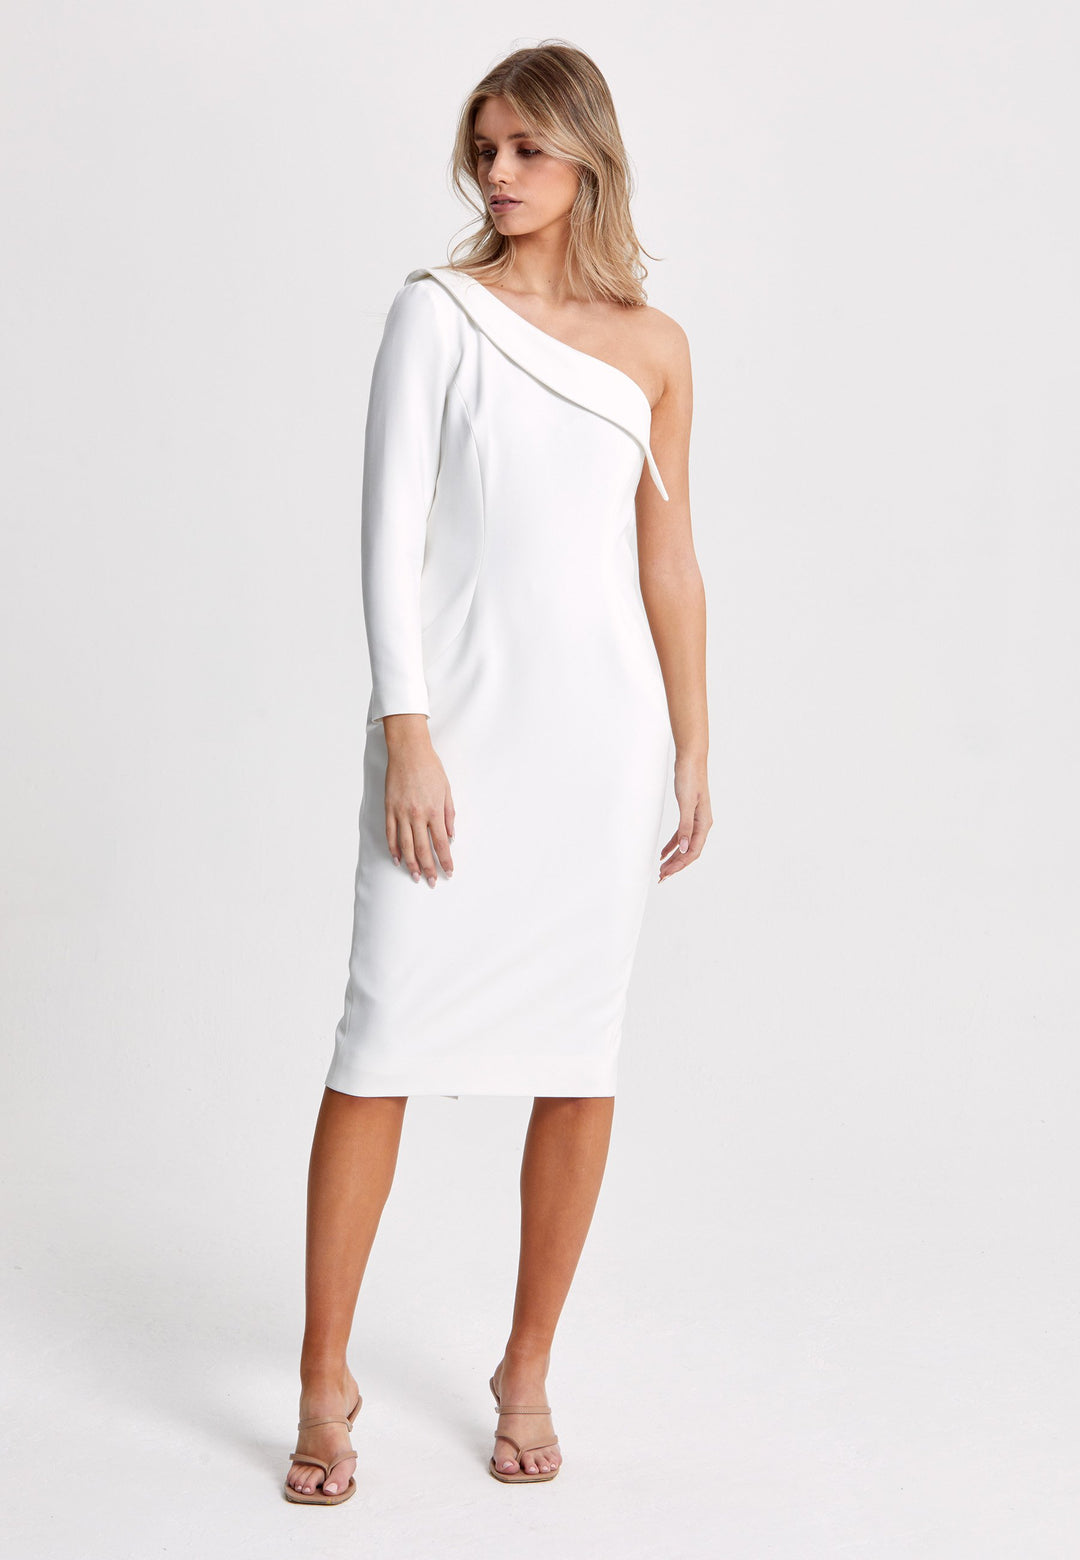 Show a little shoulder in the Harlow Dress. Engineered with a one shoulder neckline, finished with a turn down collar on our super sophisticated body skiiming silhouette. The perfect balance between sassy & elegant. This fabric is made with a hint of elastane to ensure comfort and ease of movement. The Ultimate event dress.